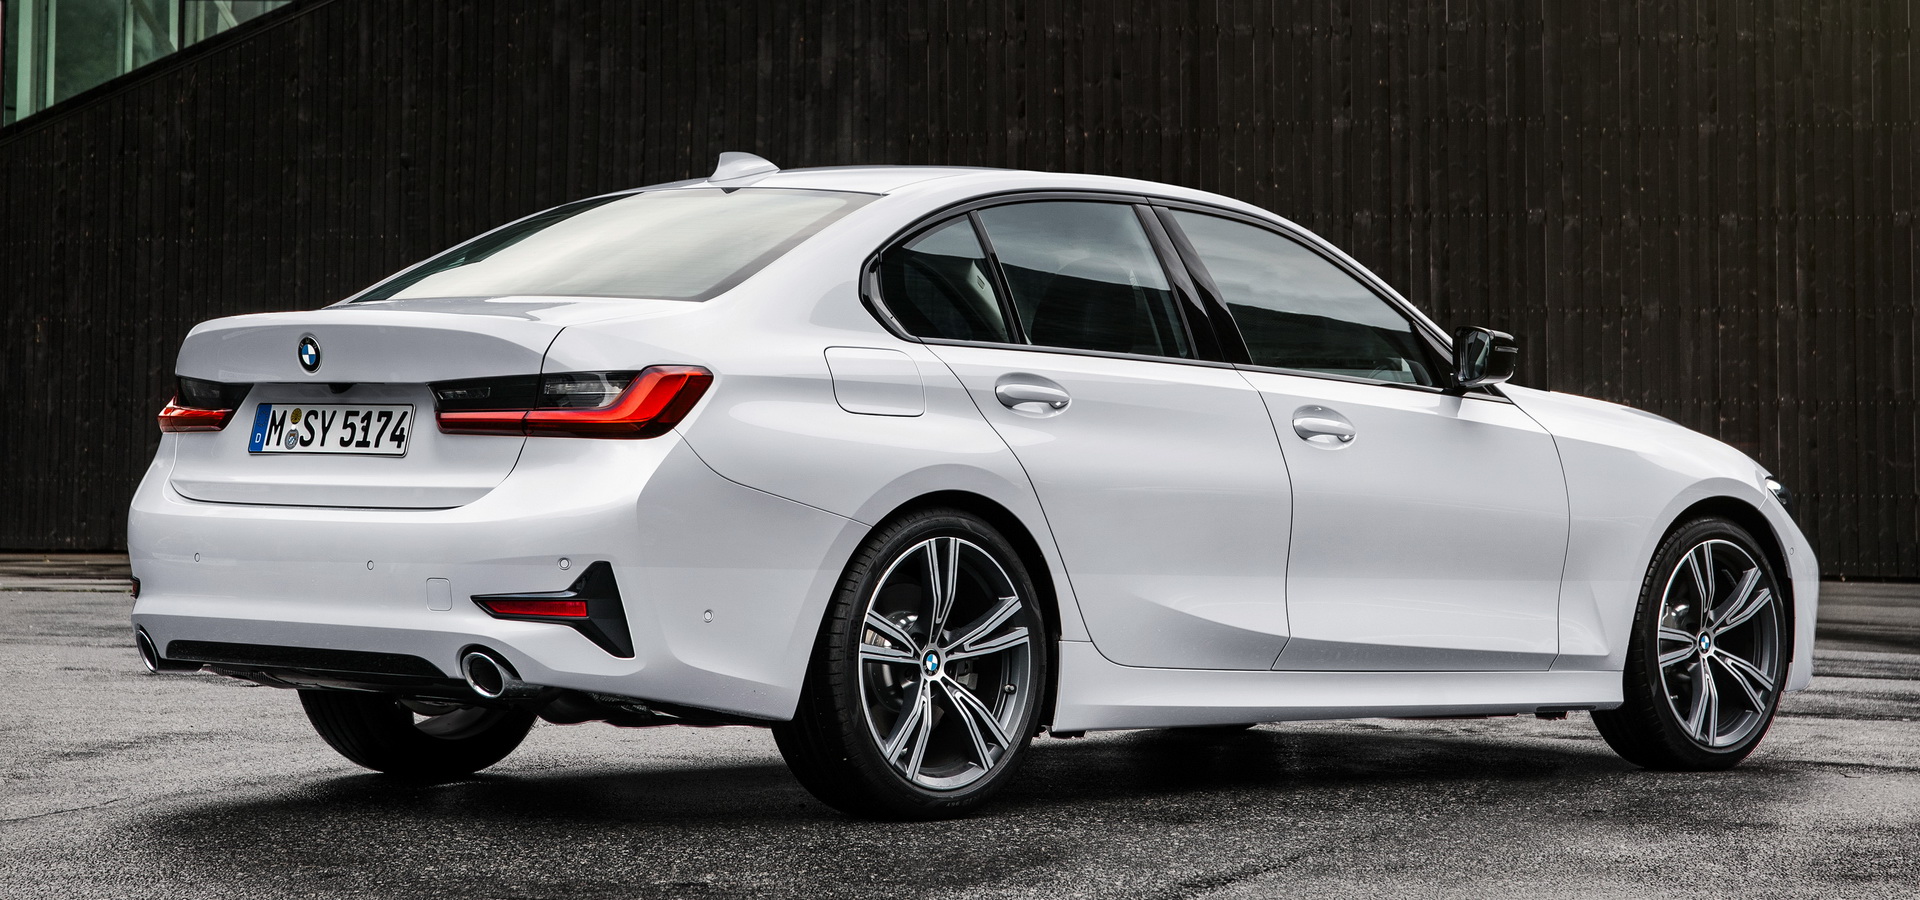 New BMW 3-Series (G20) Vs. Its Predecessor (F30): So, Is Newer